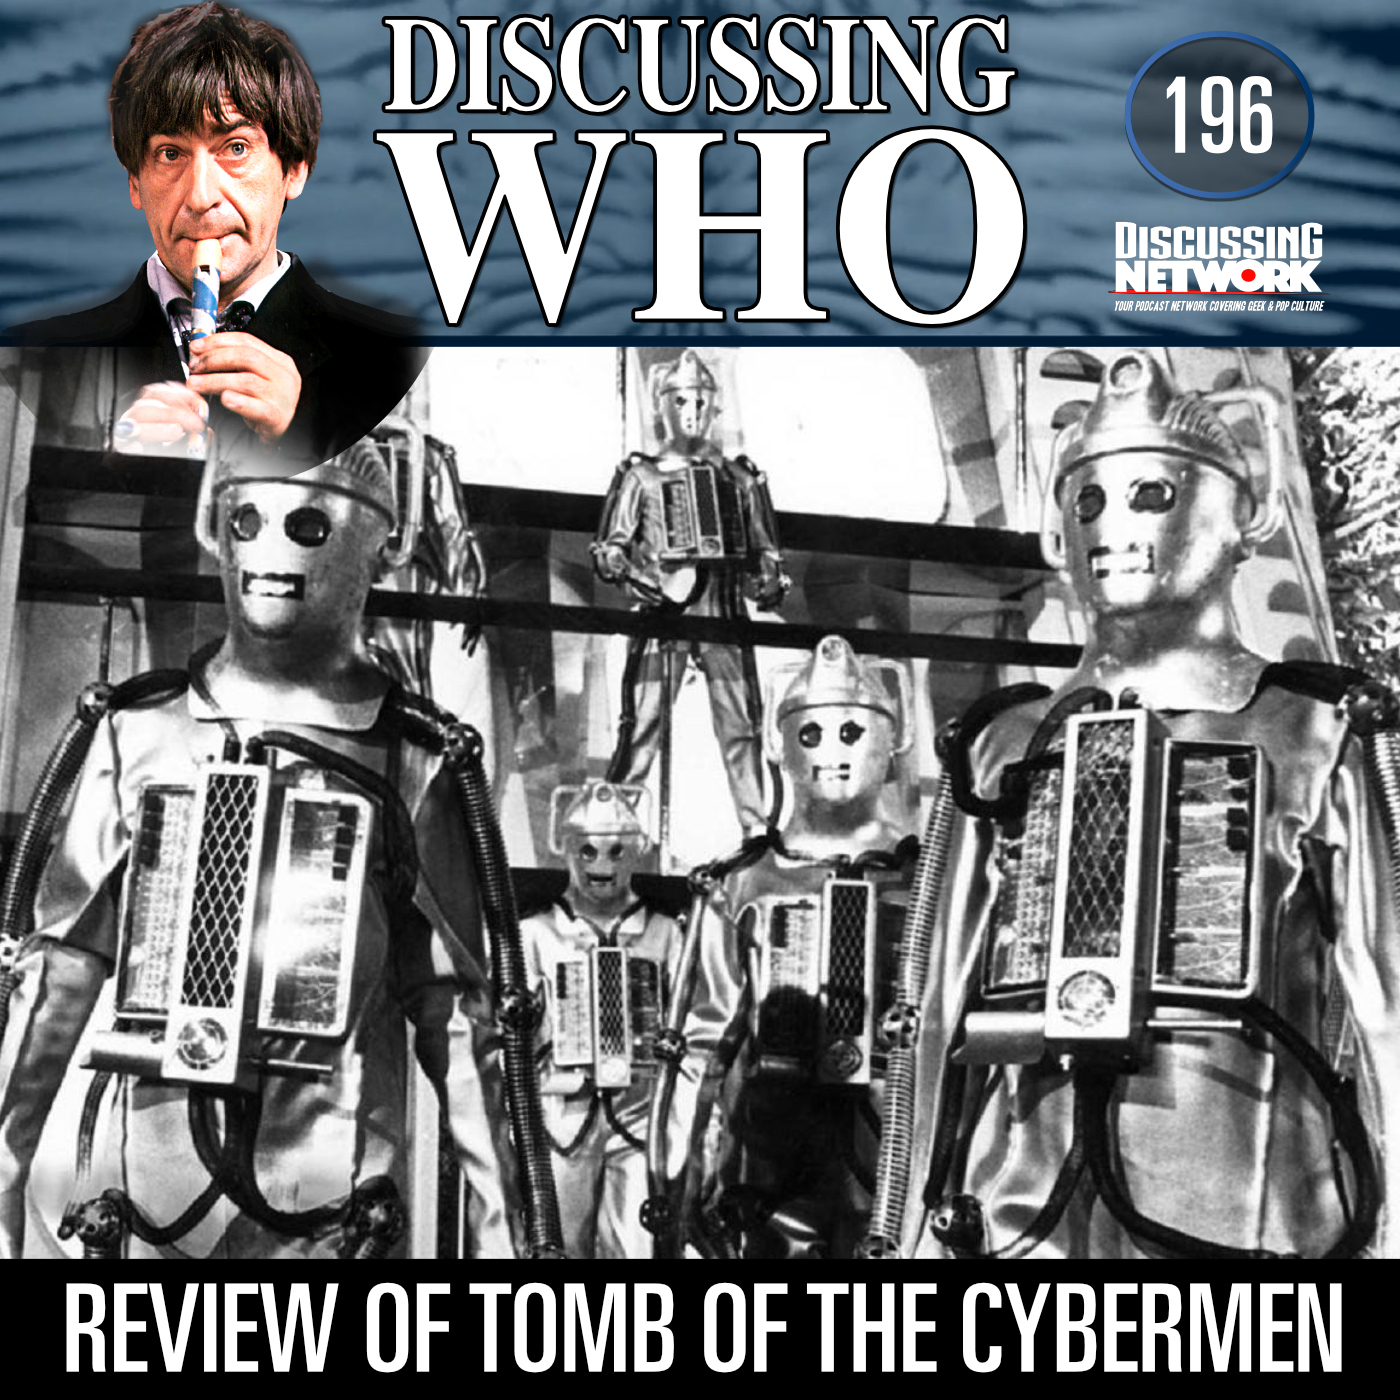 Discussing Who Review of Tomb of the Cybermen